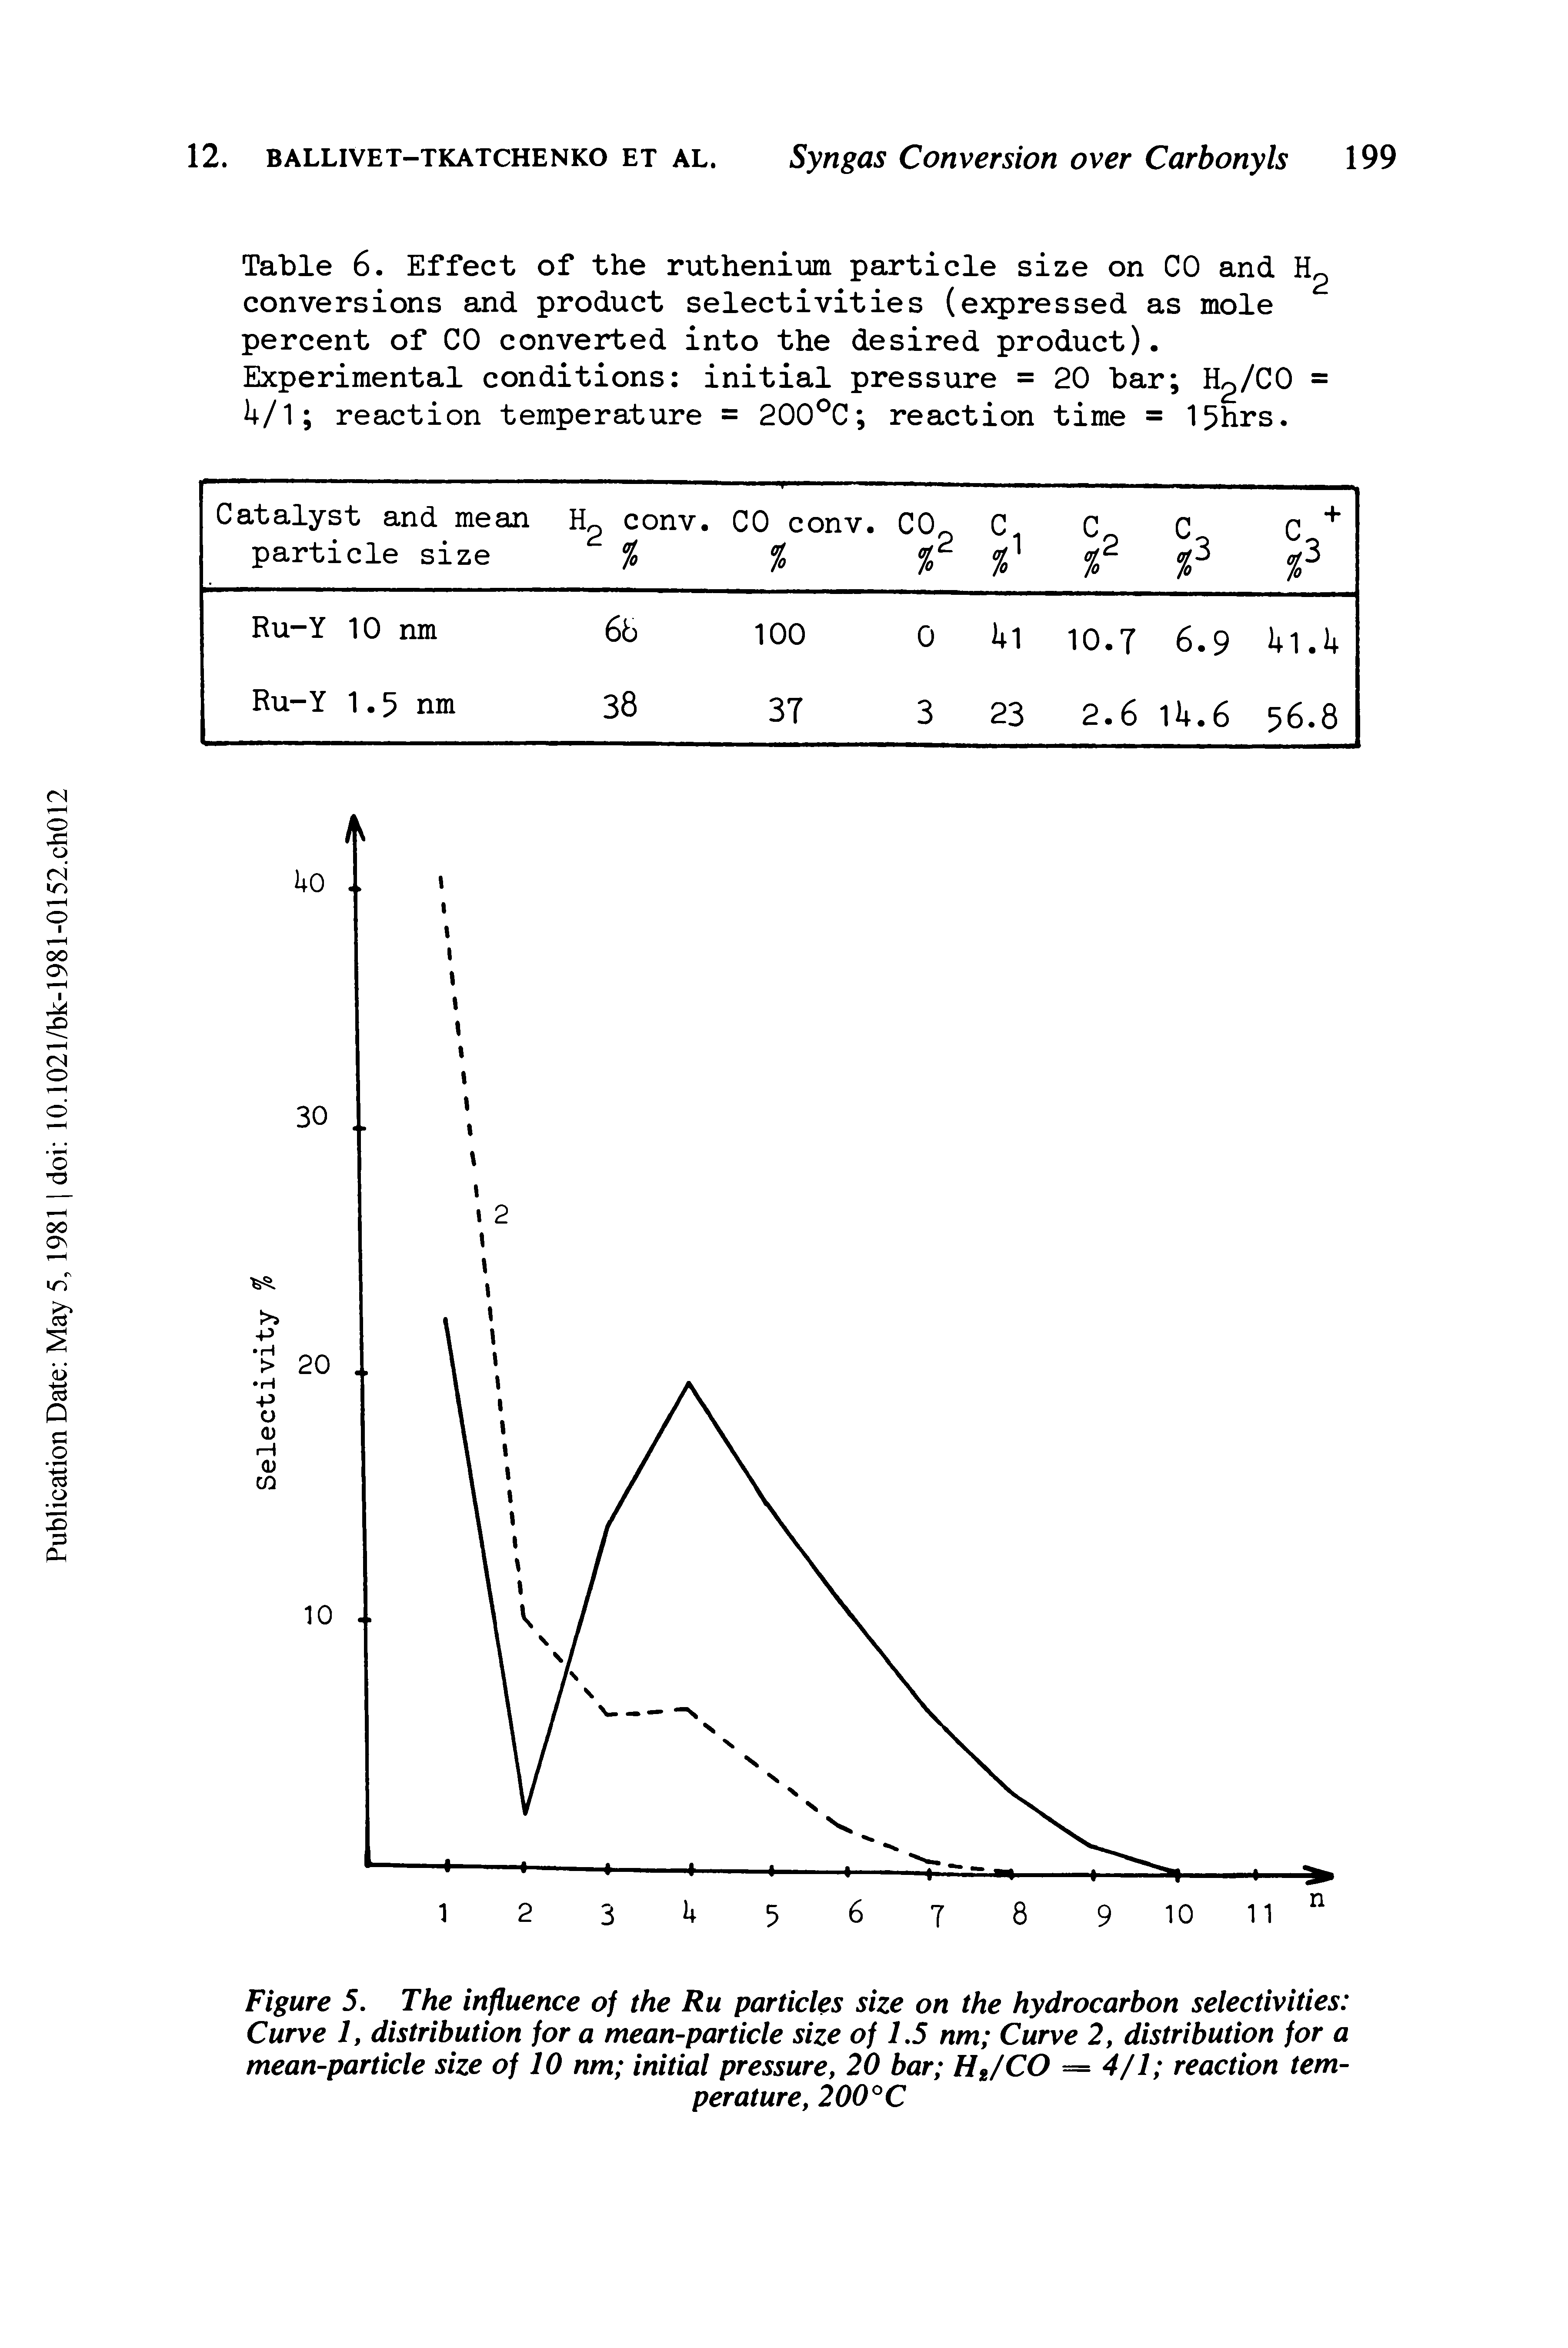 Figure 5. The influence of the Ru particles size on the hydrocarbon selectivities Curve 1, distribution for a mean-particle size of 1.5 nm Curve 2, distribution for a mean-particle size of 10 nm initial pressure, 20 bar HJCO = 4/1 reaction temperature,200°C...